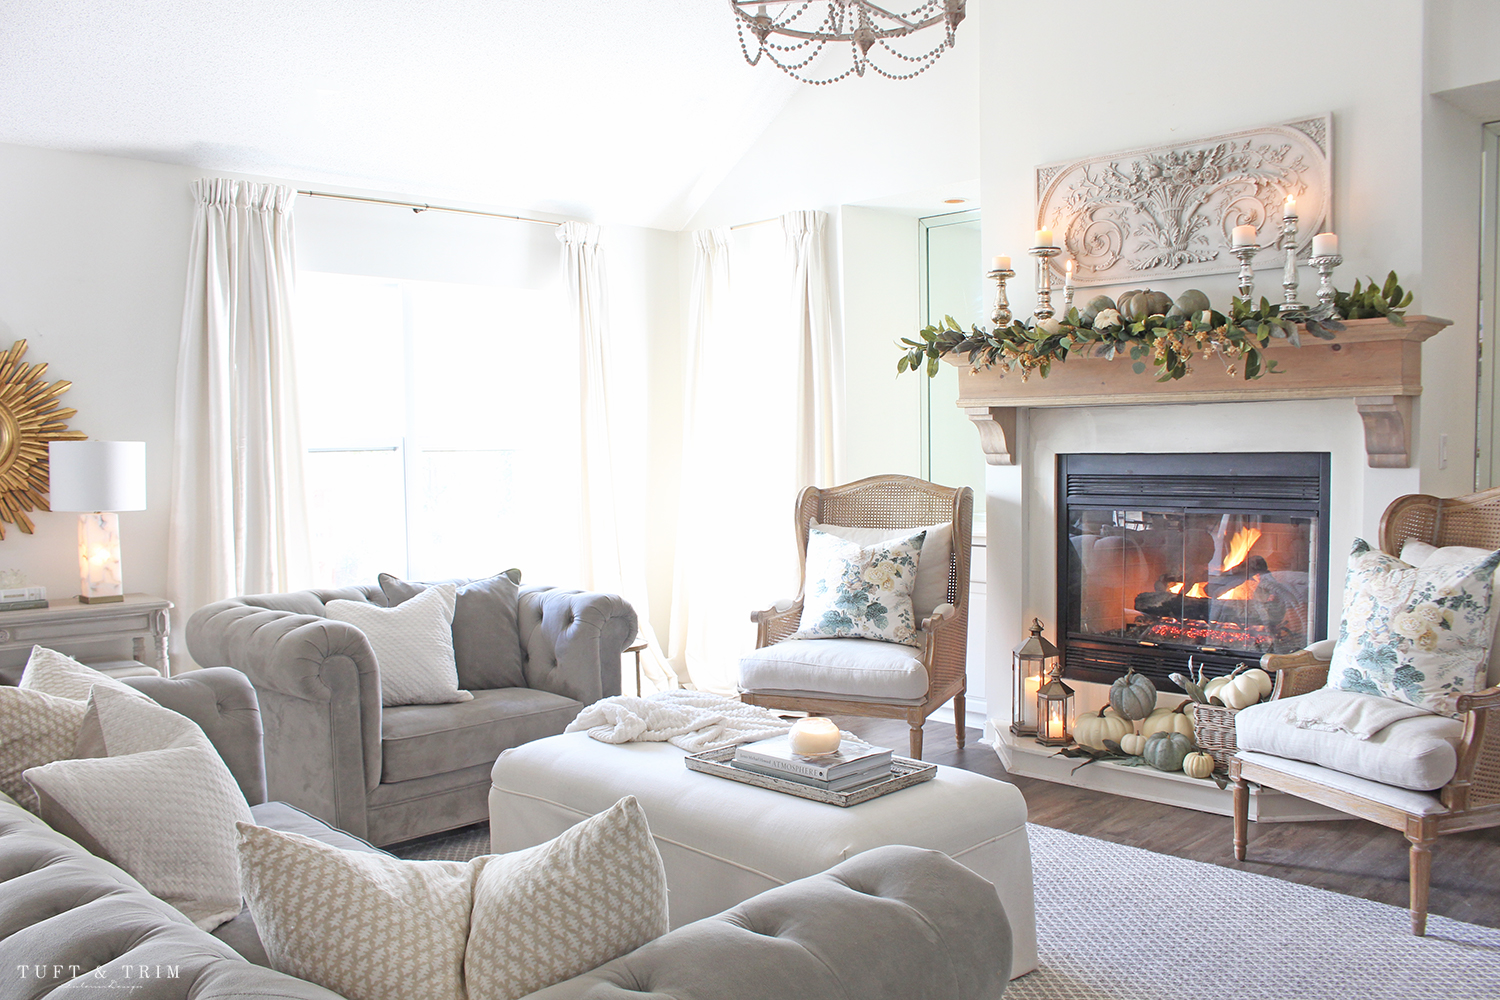 Easy Decorating Tips for an Elegant Fall Mantel